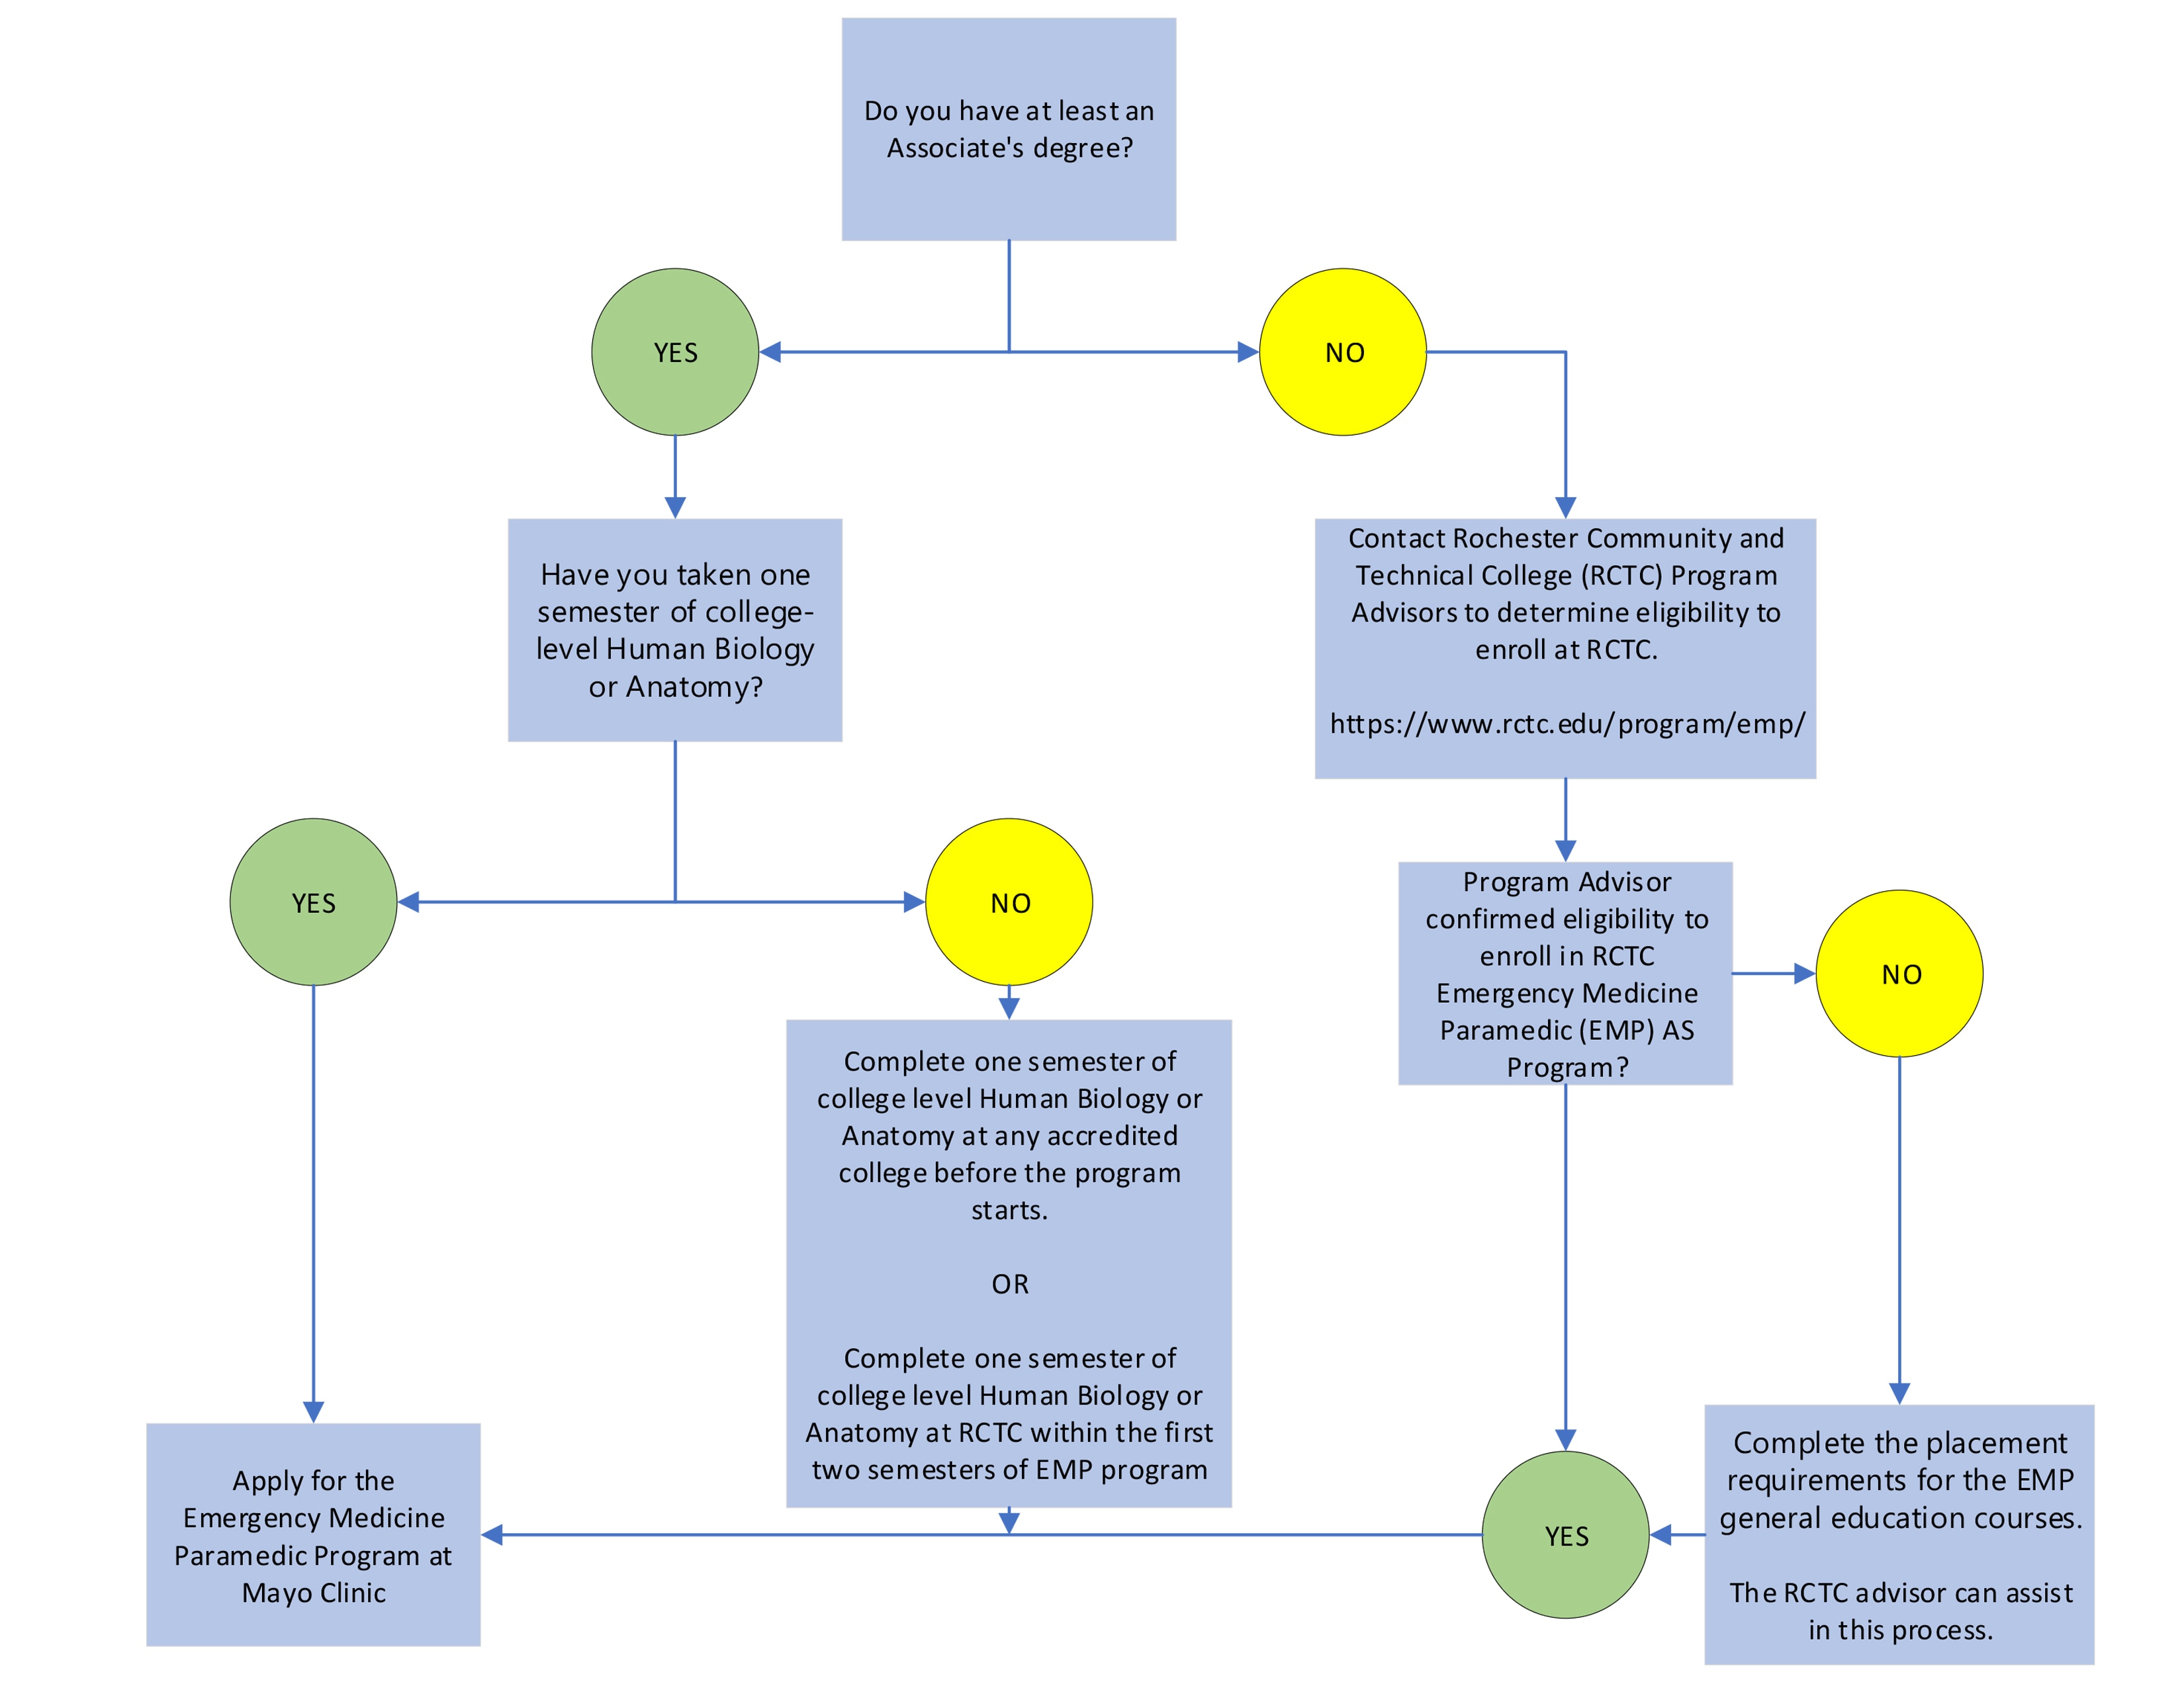 Diagram of options to enter the Emergency Medicine Paramedic Program at Mayo Clinic in Rochester, Minnesota.